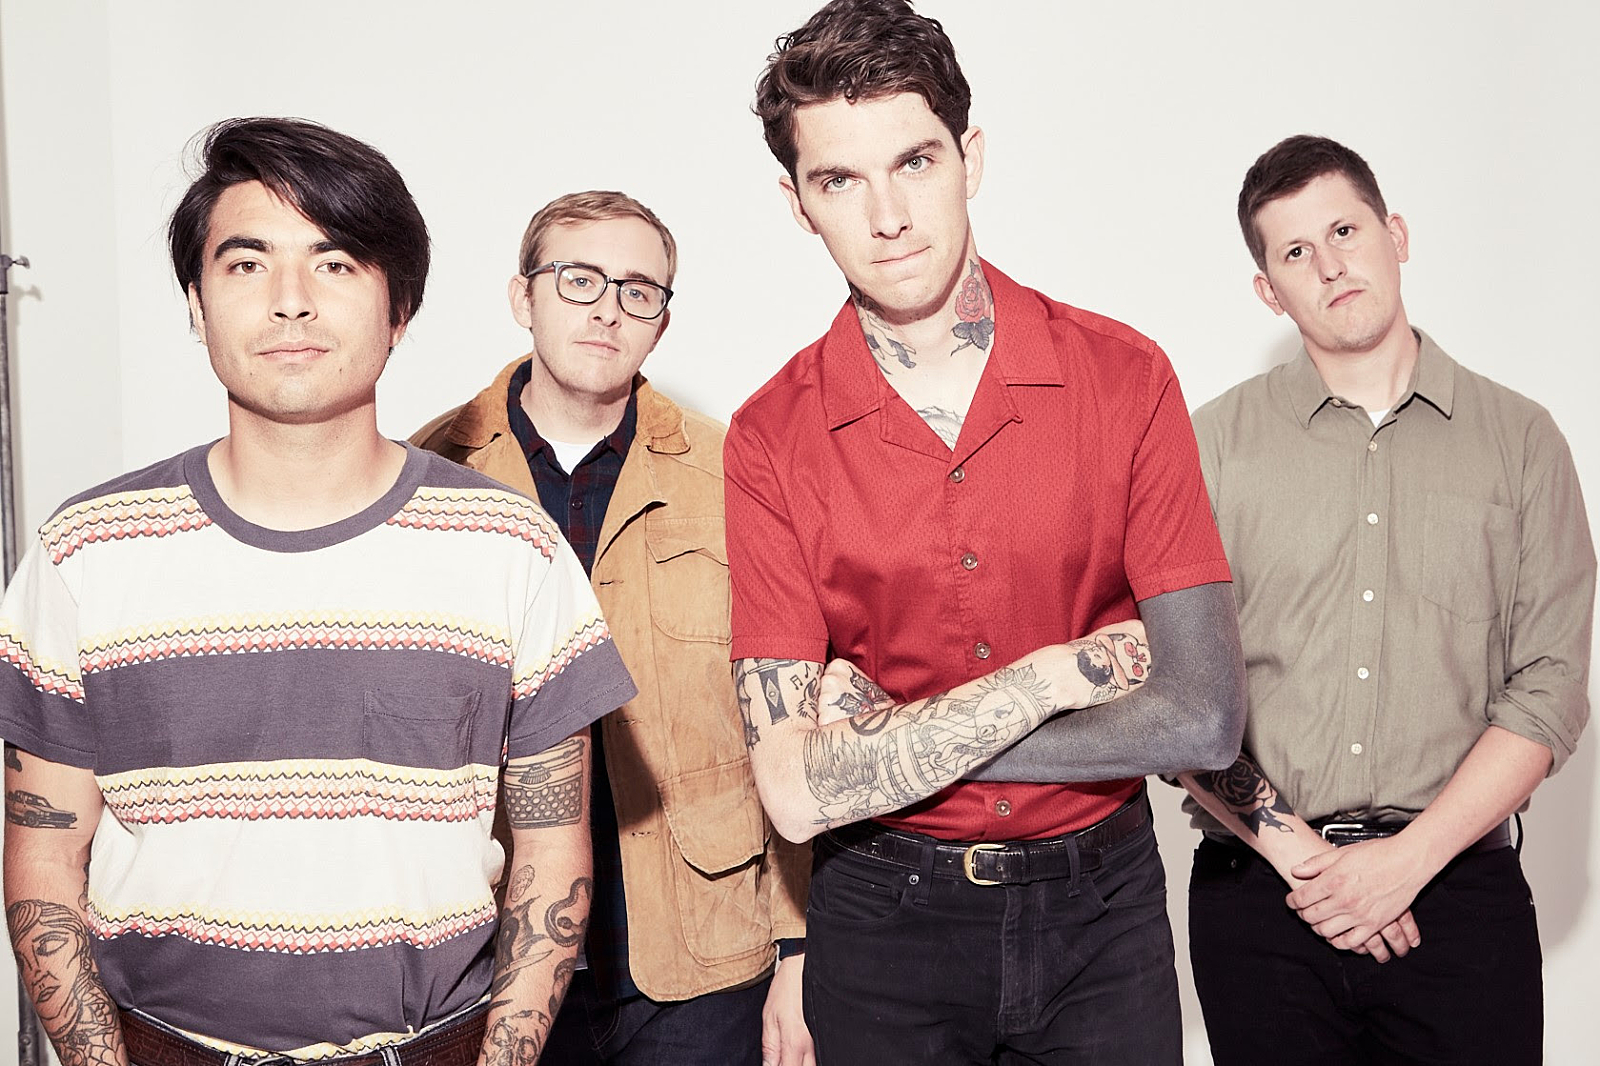 Joyce Manor release new song 'Silly Games'